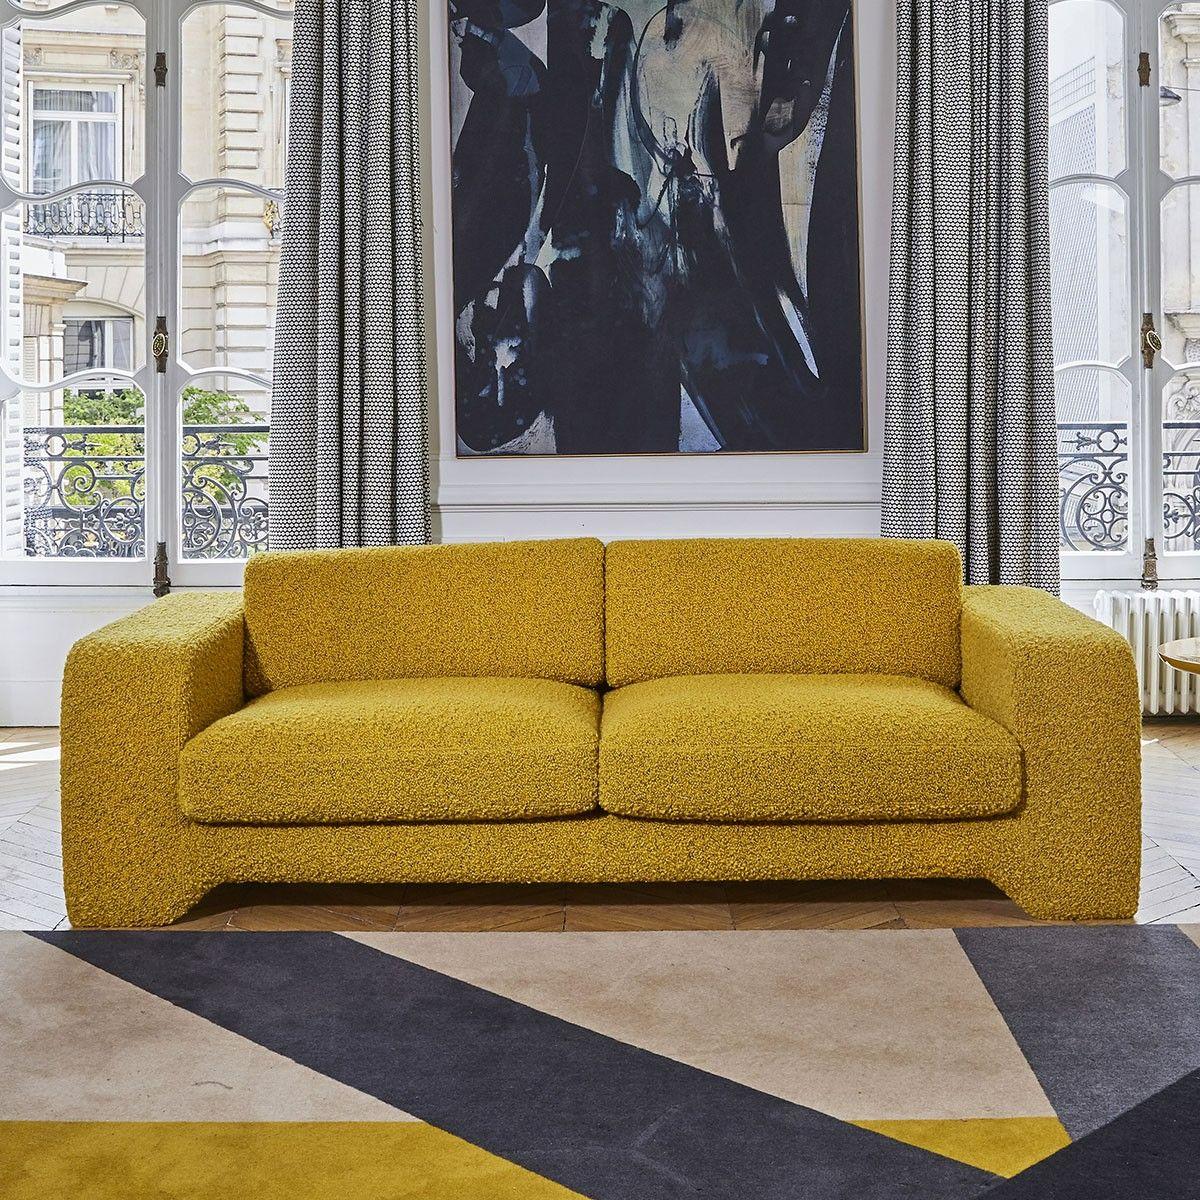 Popus Editions Giovanna 3 Seater Sofa in Green Verone Velvet Upholstery

Giovanna is a sofa with a strong profile. A sober, plush line, with this famous detail that changes everything, so as not to forget its strength of character and this